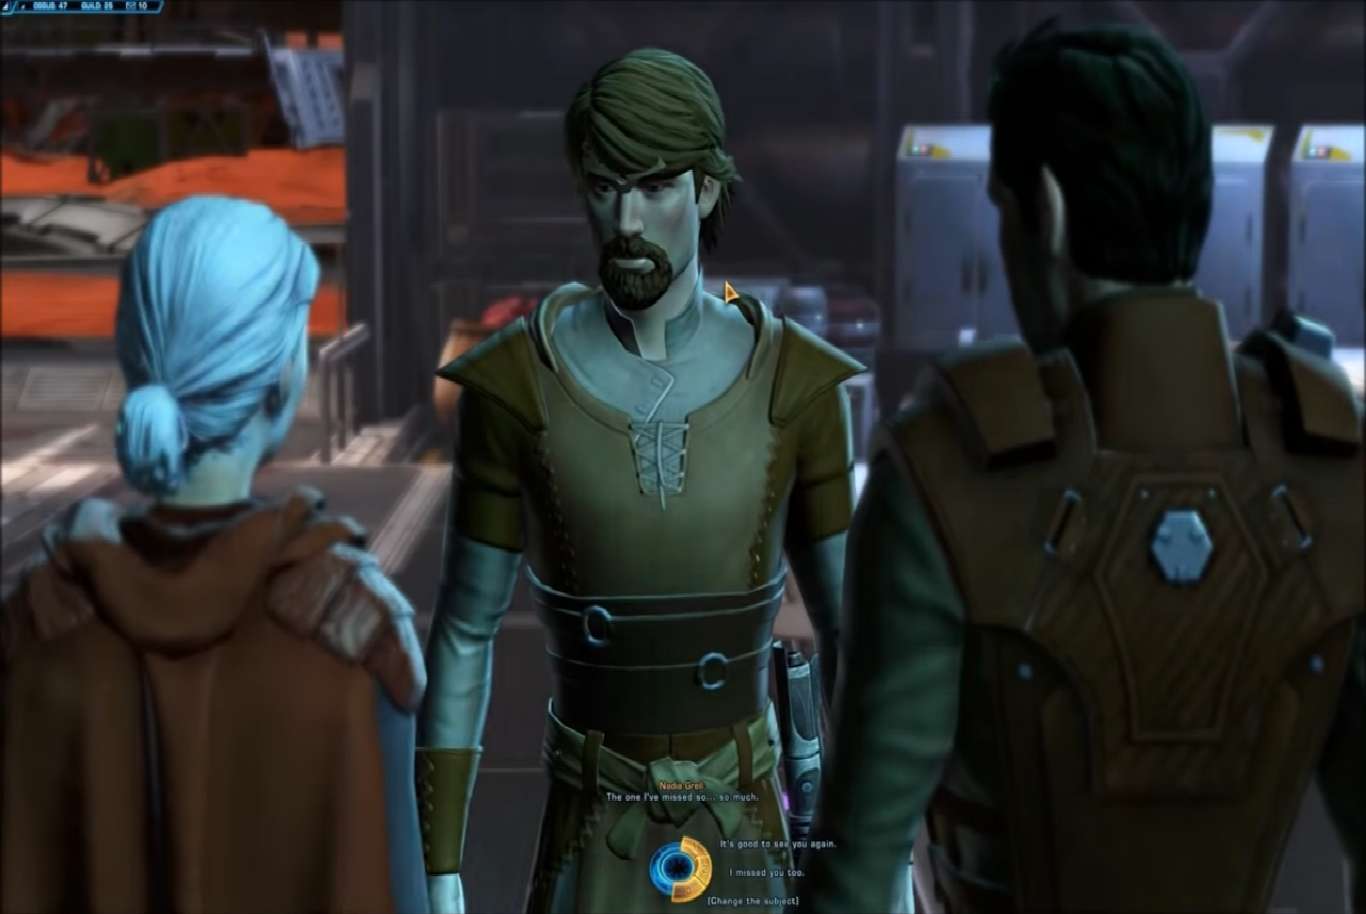 Star Wars The Old Republic Set Bonuses And New Abilities Make Consular And Inquisitor More Unique To Play